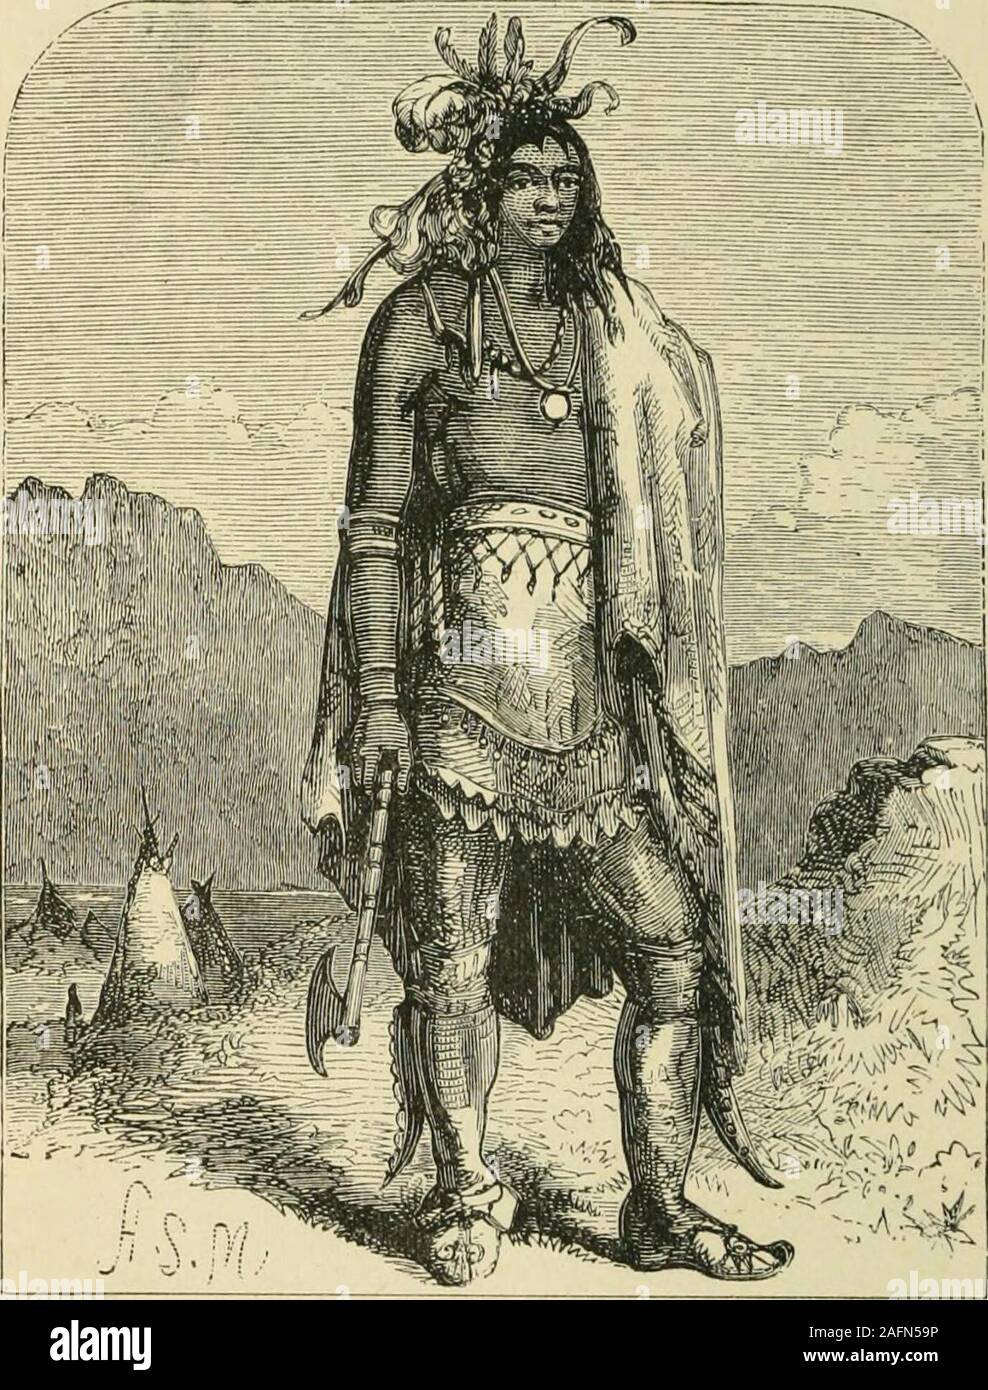 . The world's inhabitants; or, Mankind, animals, and plants; being a popular account of the races and nations of mankind, past and present, and the animals and plants inhabiting the great continents and principal islands. ir chief. SittingBull, was able to main-tain a successful resist-ance against all thetroops that could bebrought against him,and he finally escapedinto the Canadian Do-minion with all his fol-lowers. The Crows area branch of the Dakotasin Southern Montana, anoted tribe of maraud-ers and horse-stealers,who cannot be said to bereally subject, thoughthey avoid open warwith the w Stock Photo